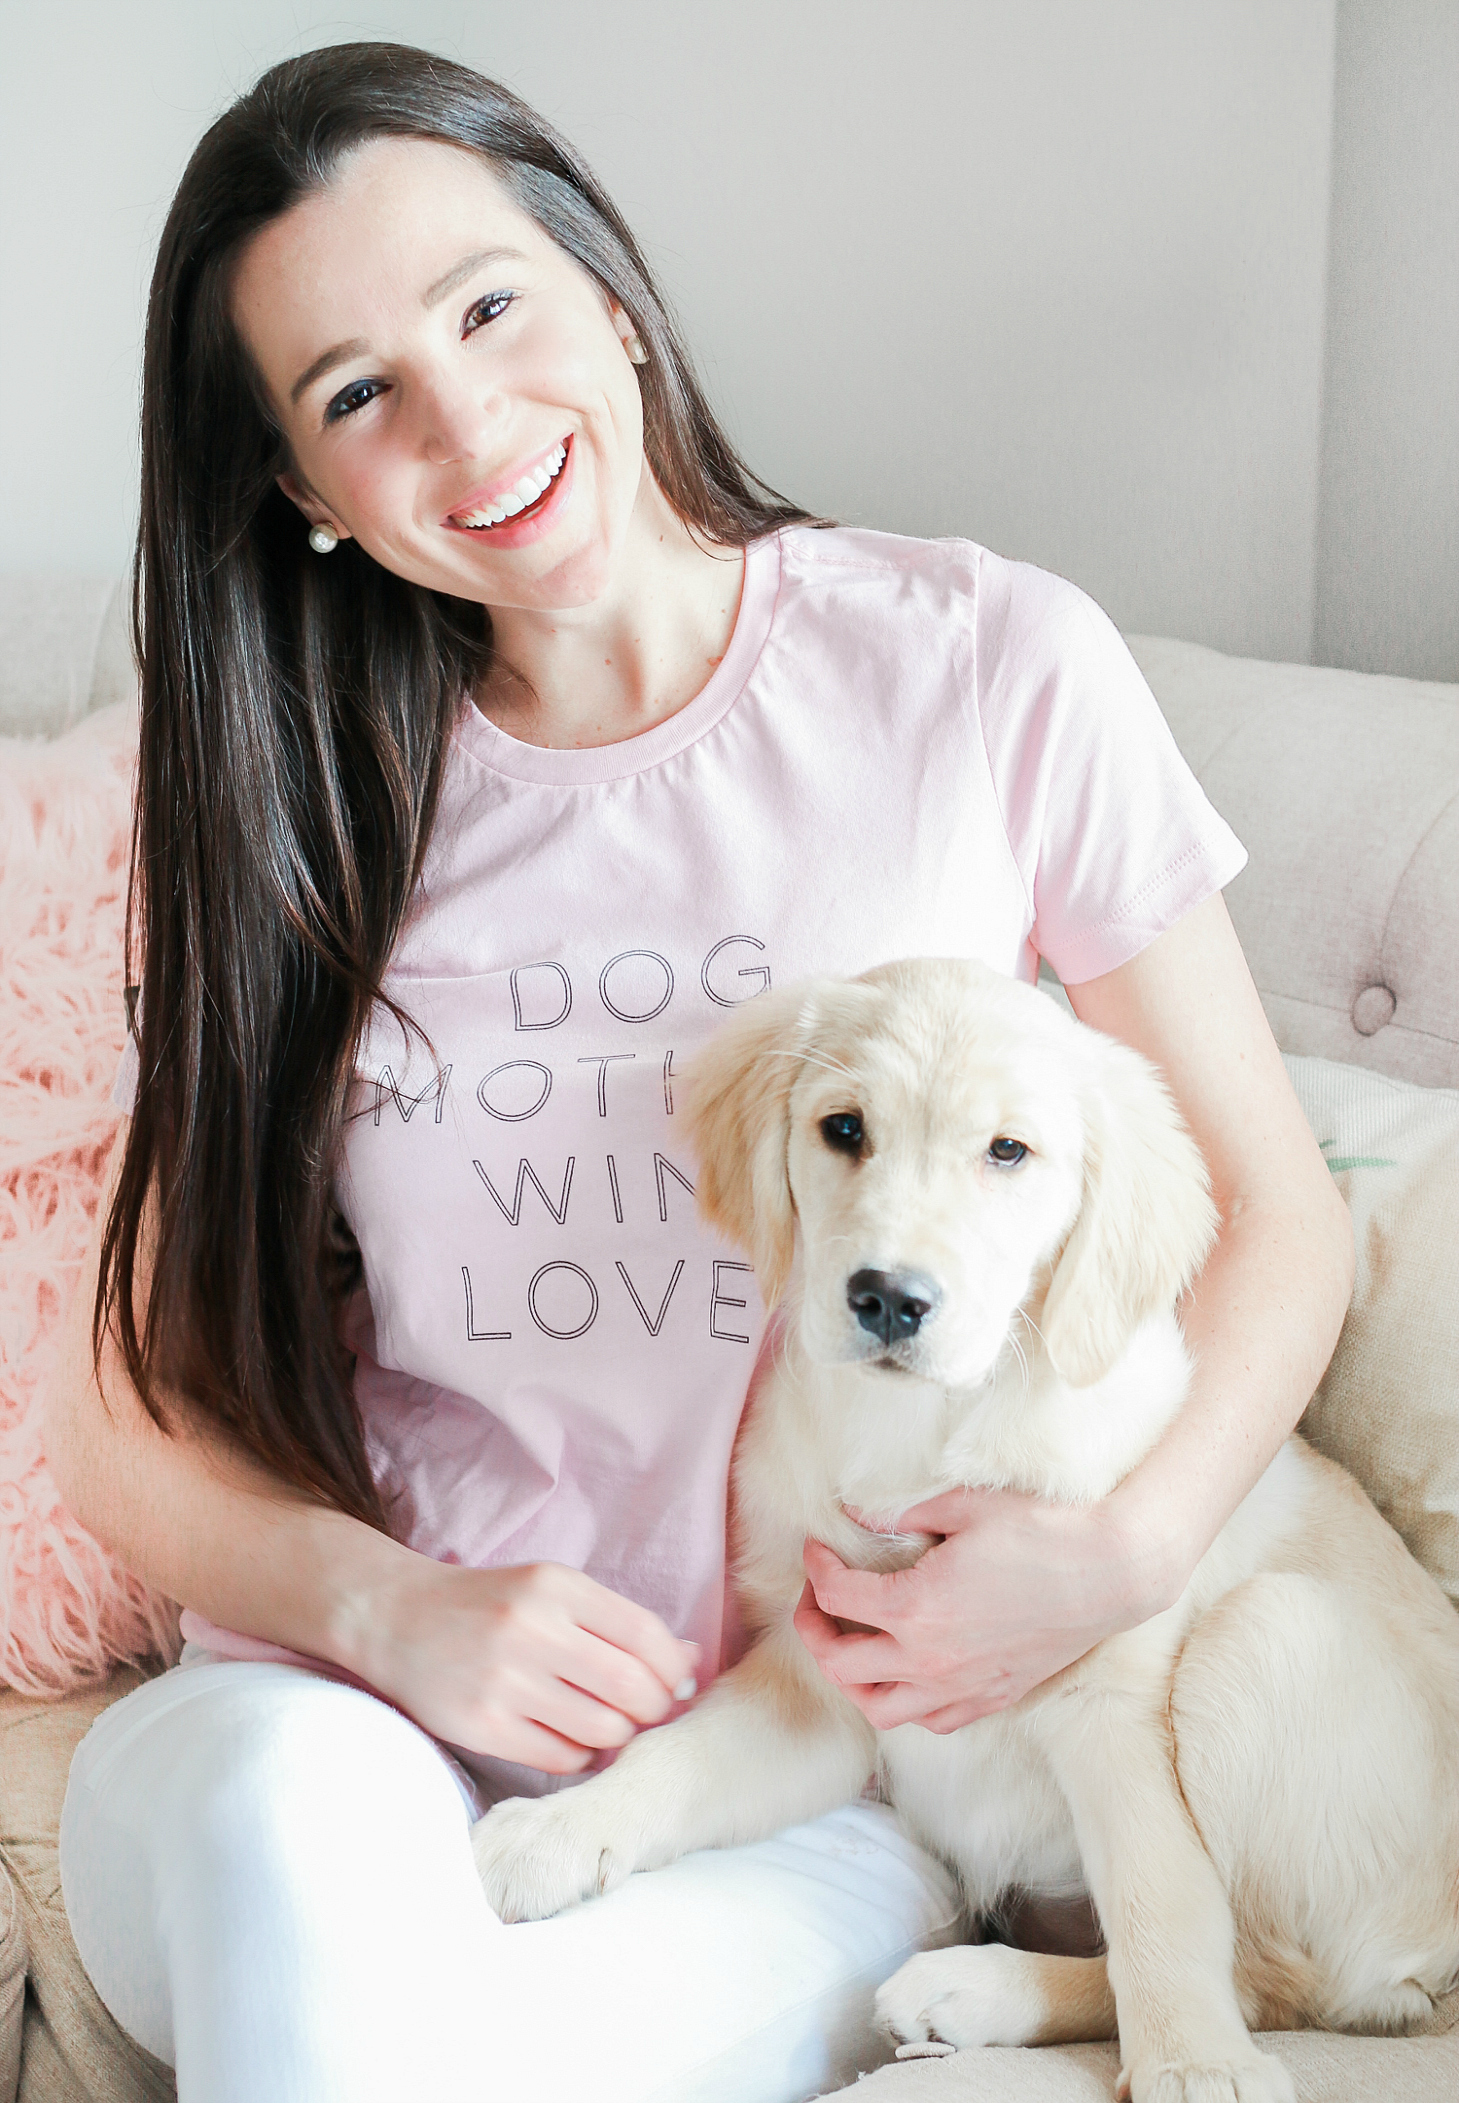 Dog Mother Wine Lover shirt, Woman's Best Friend: 8 Reasons to Get a Puppy by southern lifestyle blogger Stephanie Ziajka from Diary of a Debutante, how a new golden retriever puppy can help if you're depressed in a new city, 8 reasons to get a puppy, 8 reasons why you should get a dog, 4 month old golden retriever puppy pictures